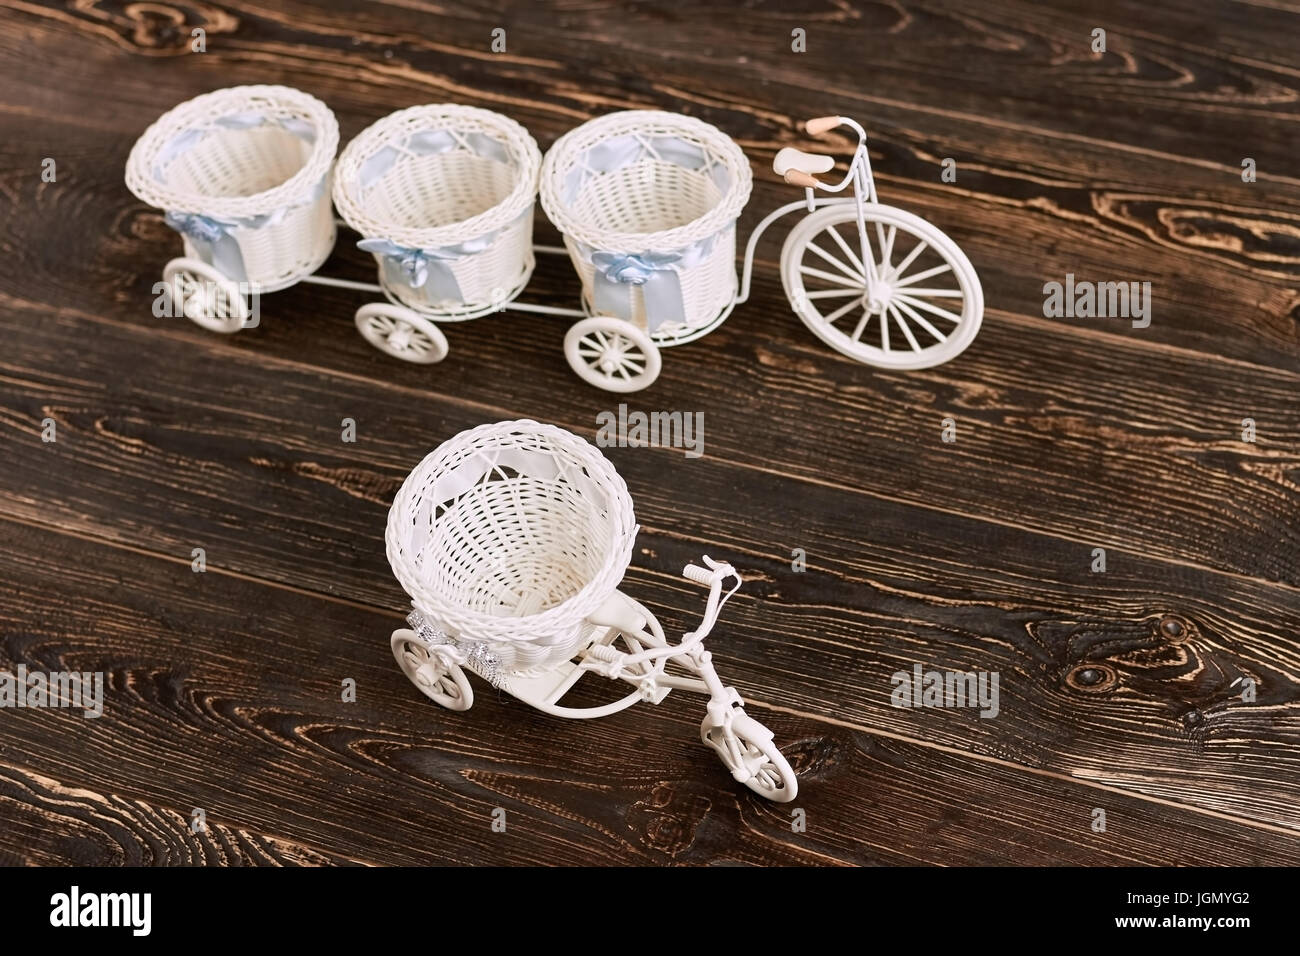 Tricycle flower baskets on wood. White plastic toys. Cheap home ...